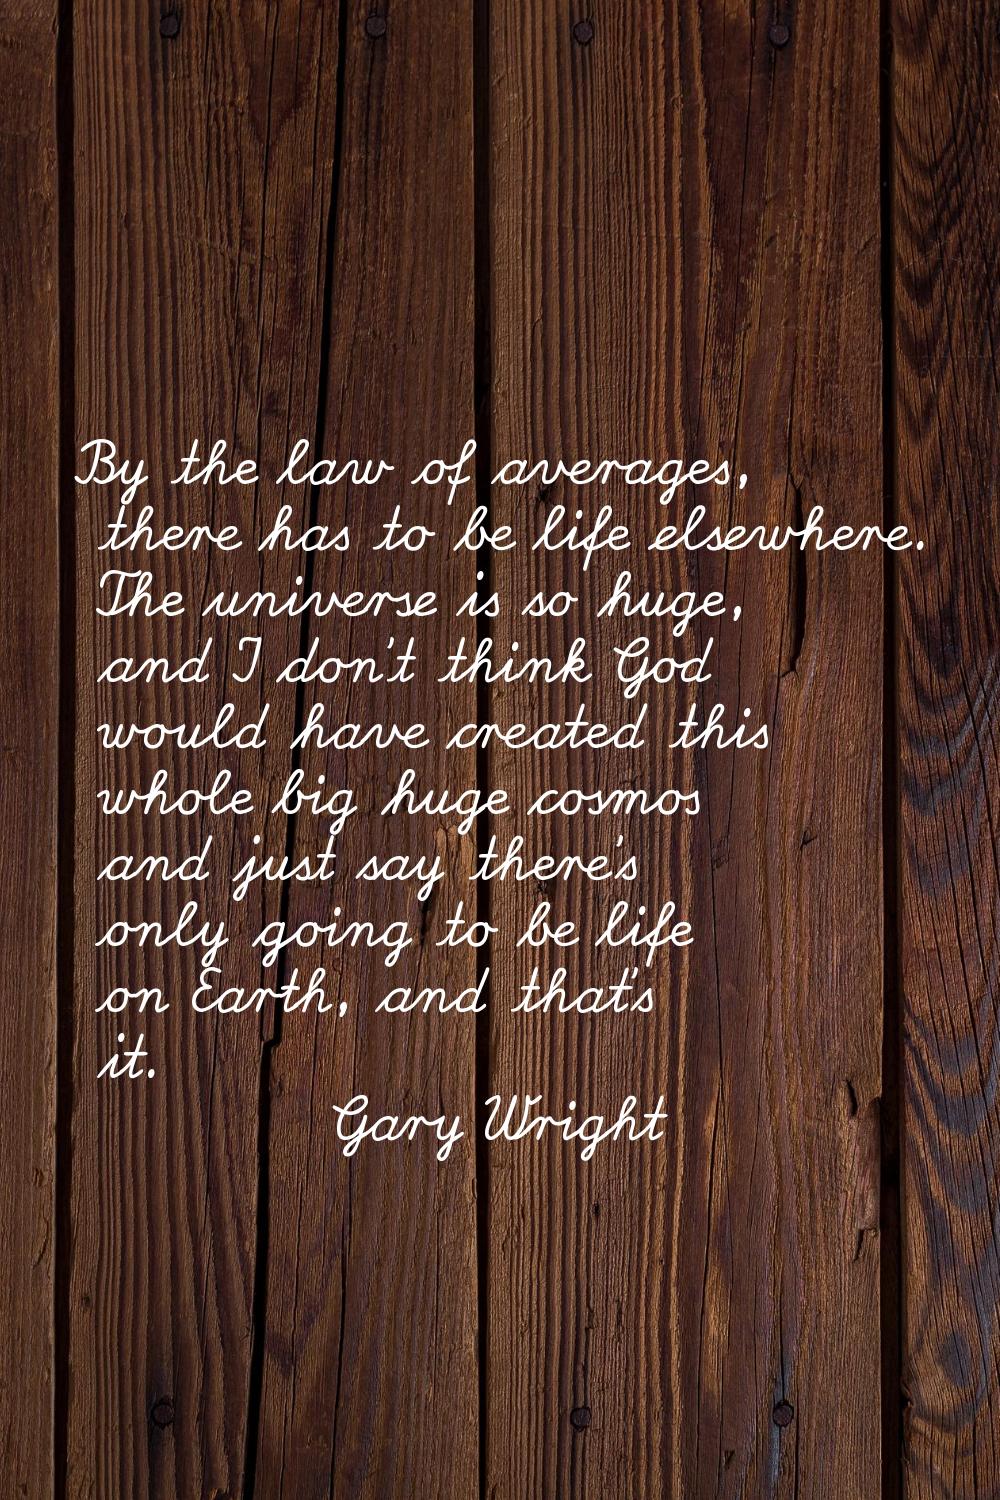 By the law of averages, there has to be life elsewhere. The universe is so huge, and I don't think 